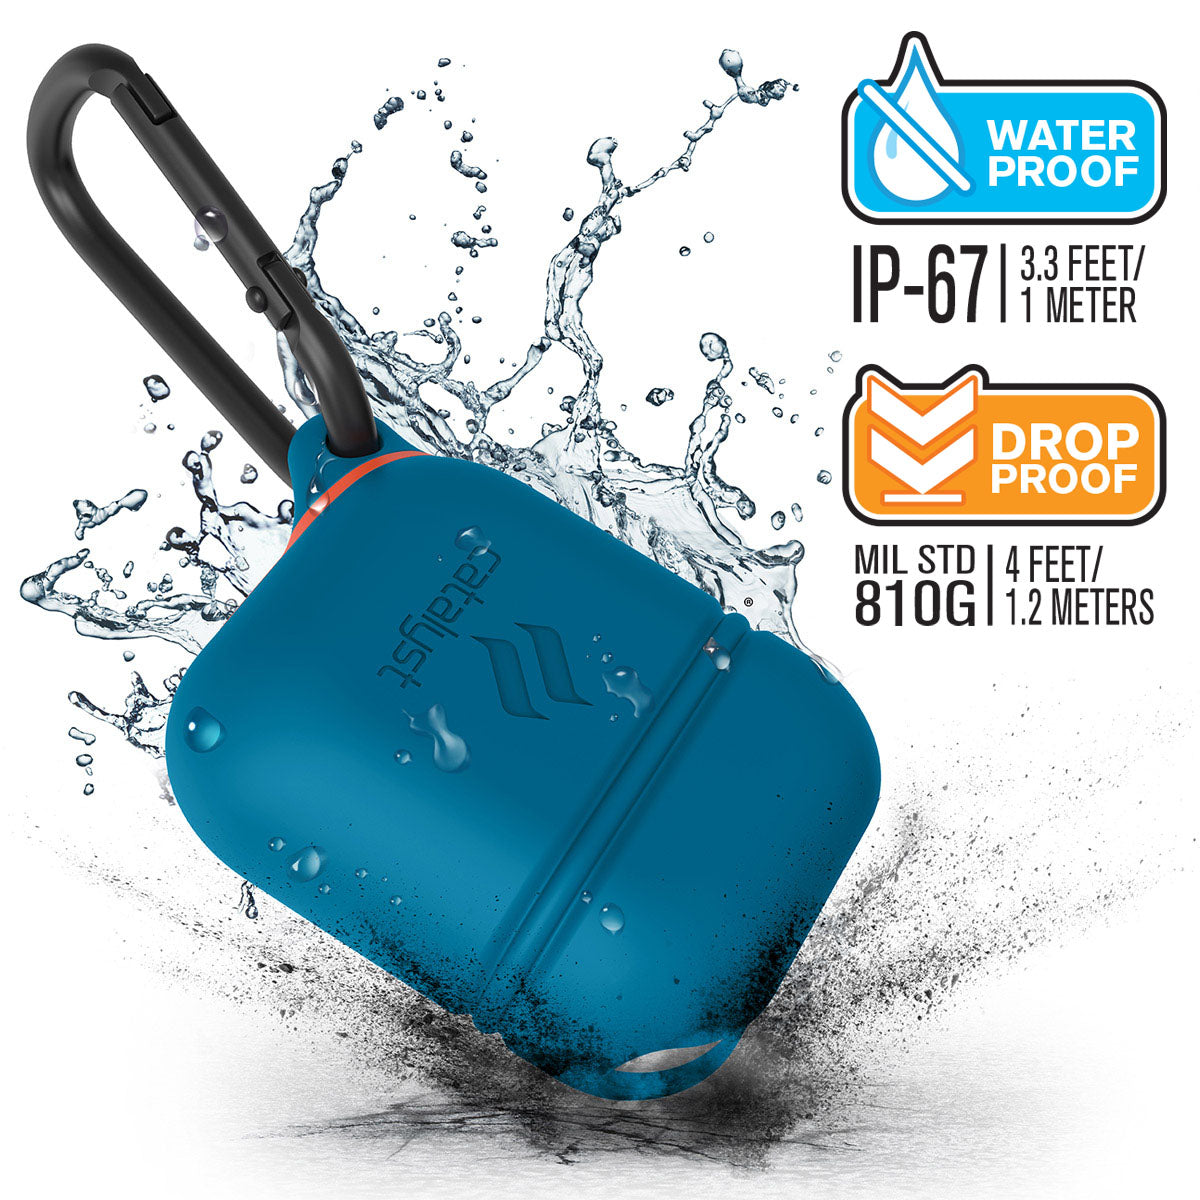 Catalyst airpods gen2/1 waterproof case + carabiner showing the case drop proof and water proof features with attached carabiner in blueridge-sunset text reads water proof IP-67 3.3 FEET/1 METER DROP PROOF MIL STD 810G 1.2 METERS